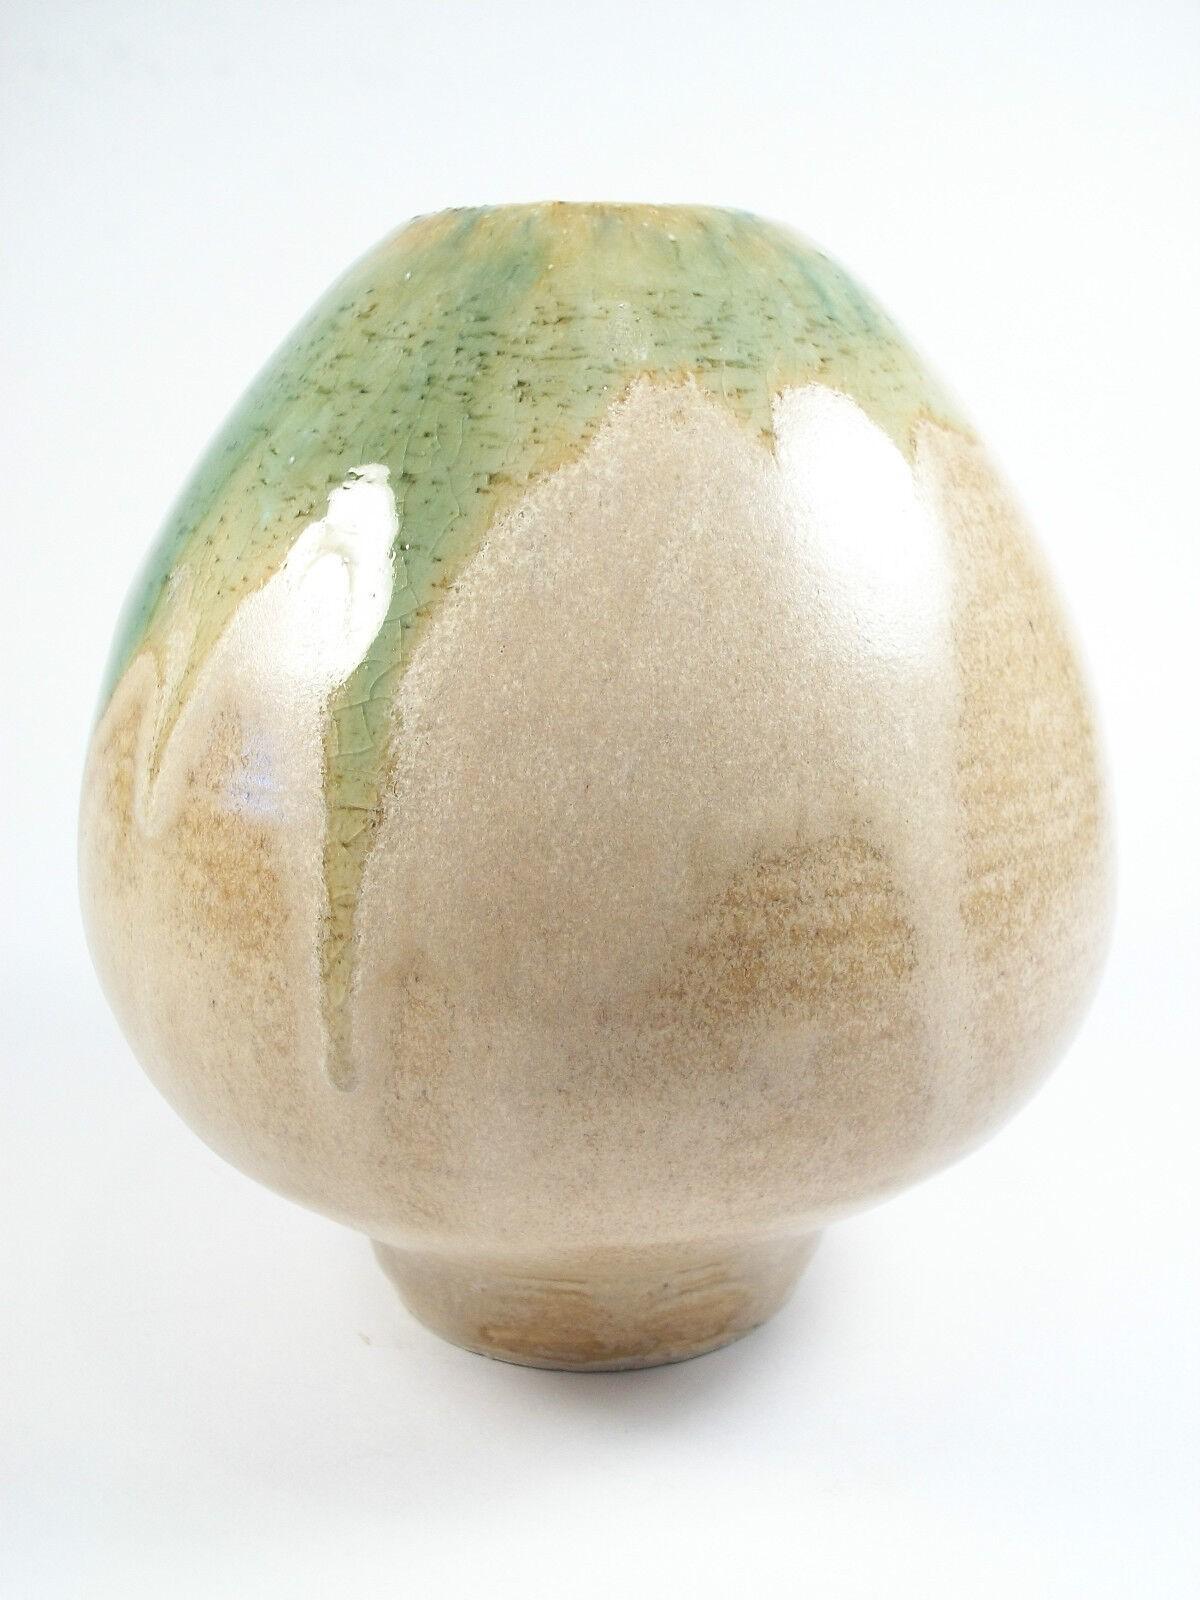 Vintage - studio pottery - Mid Century Modern - wheel thrown porcelain like stoneware vase - tapering to a narrow foot - with a taupe colored glaze as well as a gloss green volcanic drip detail to the rim - marked on the base with the